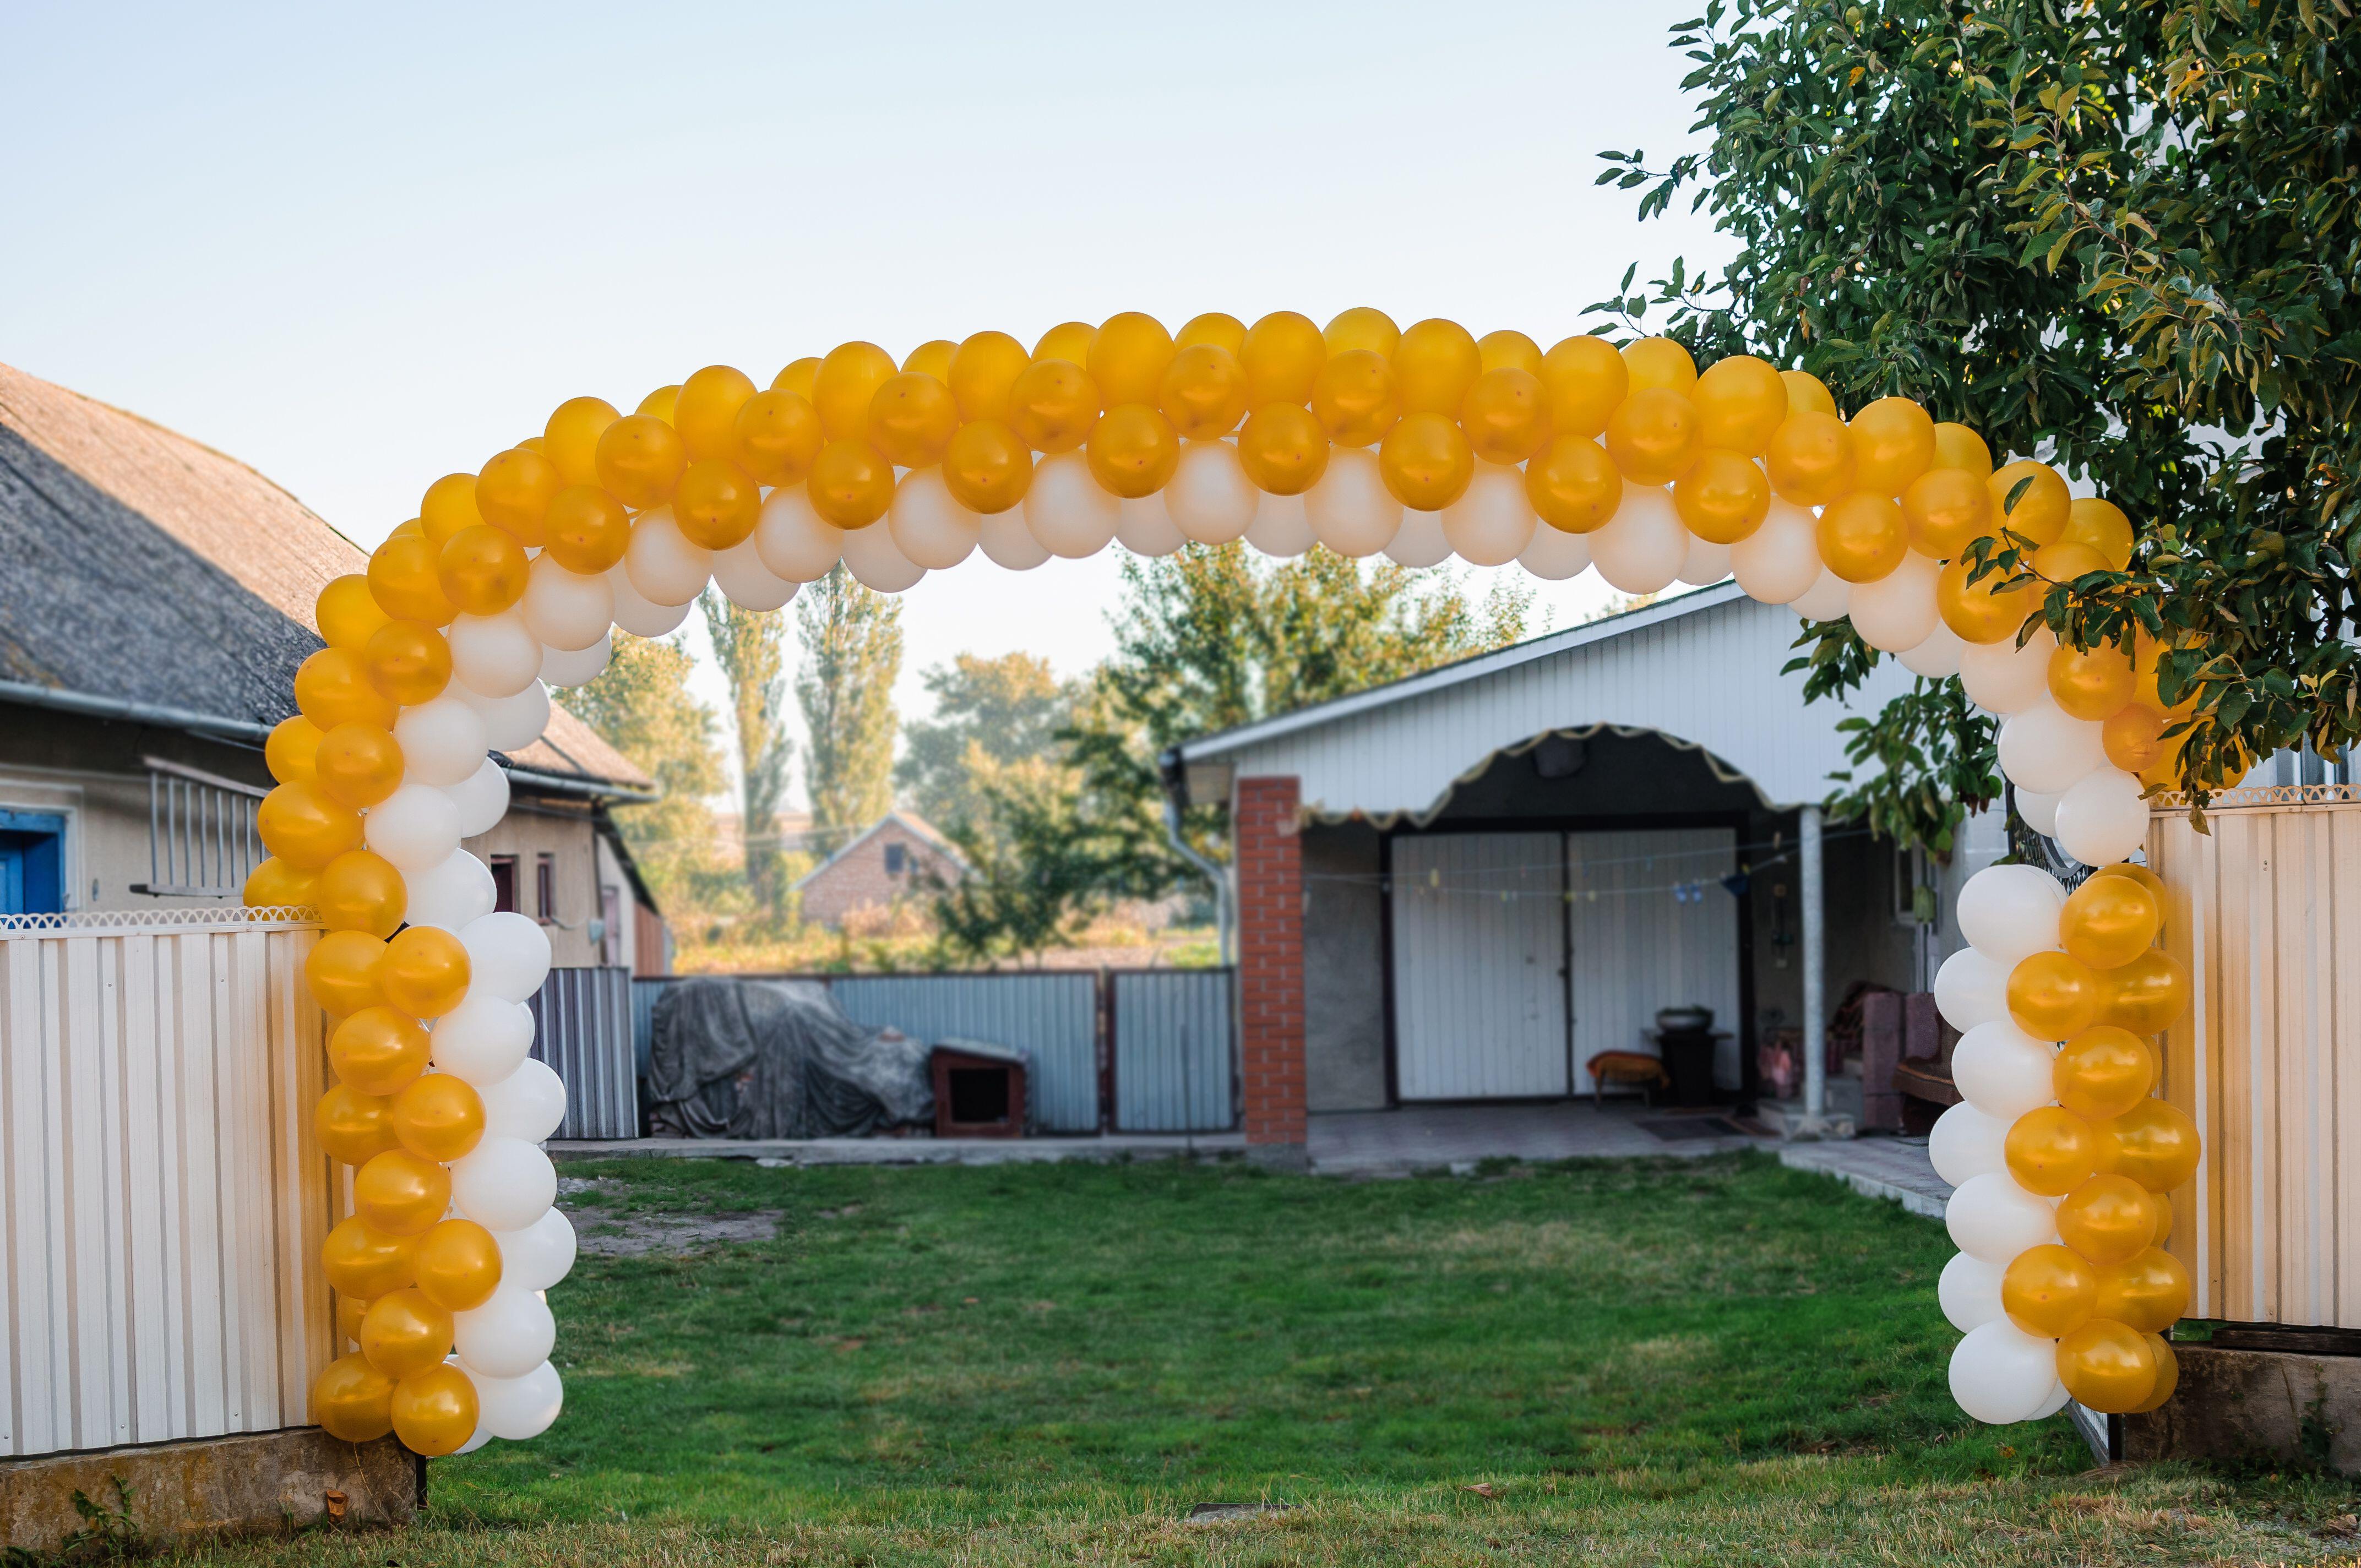 A balloon arch at a children's party